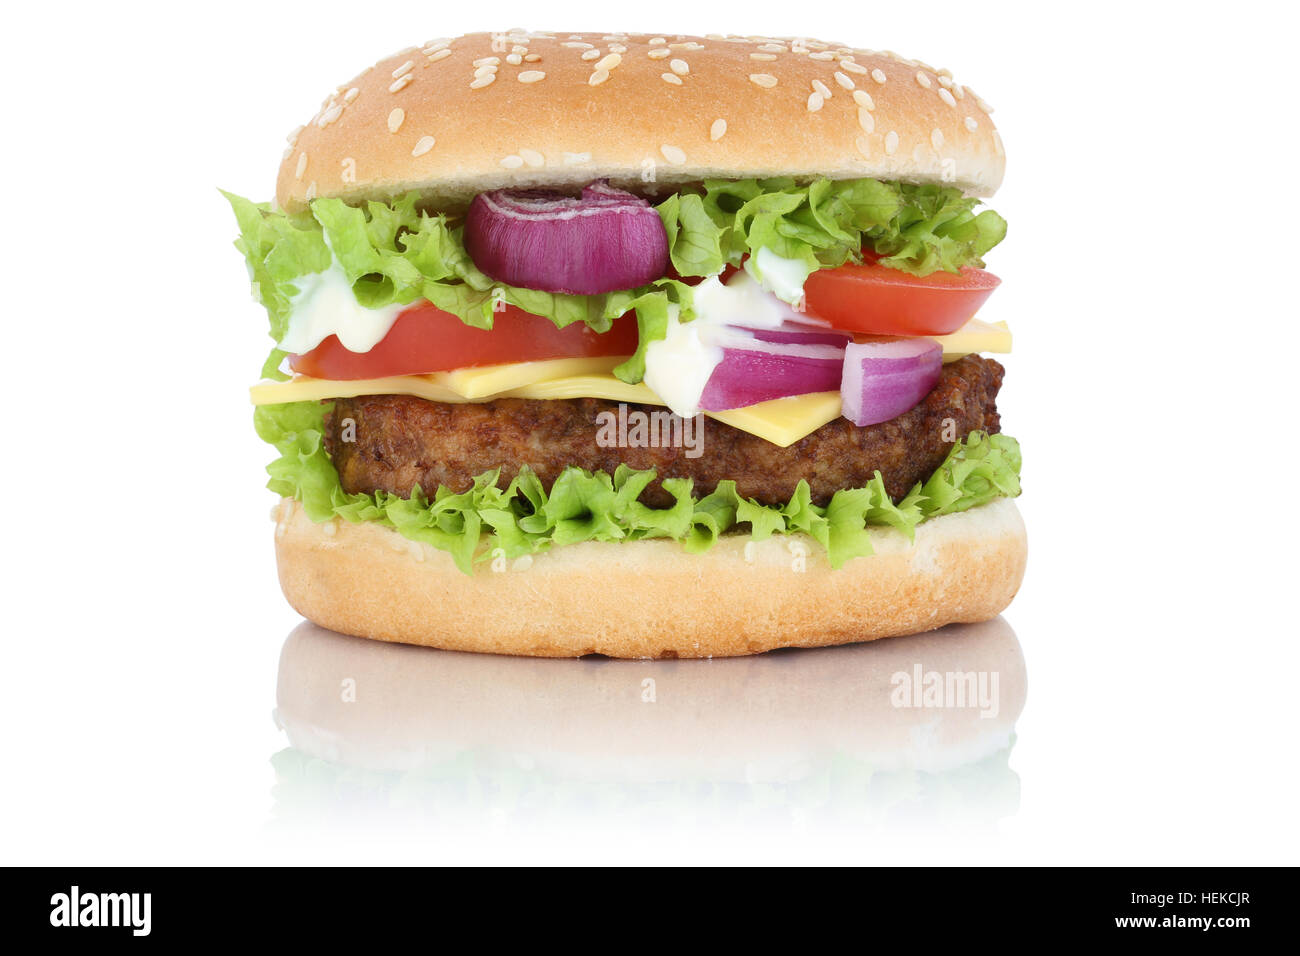 Cheeseburger hamburger lettuce cheese isolated on a white background Stock Photo